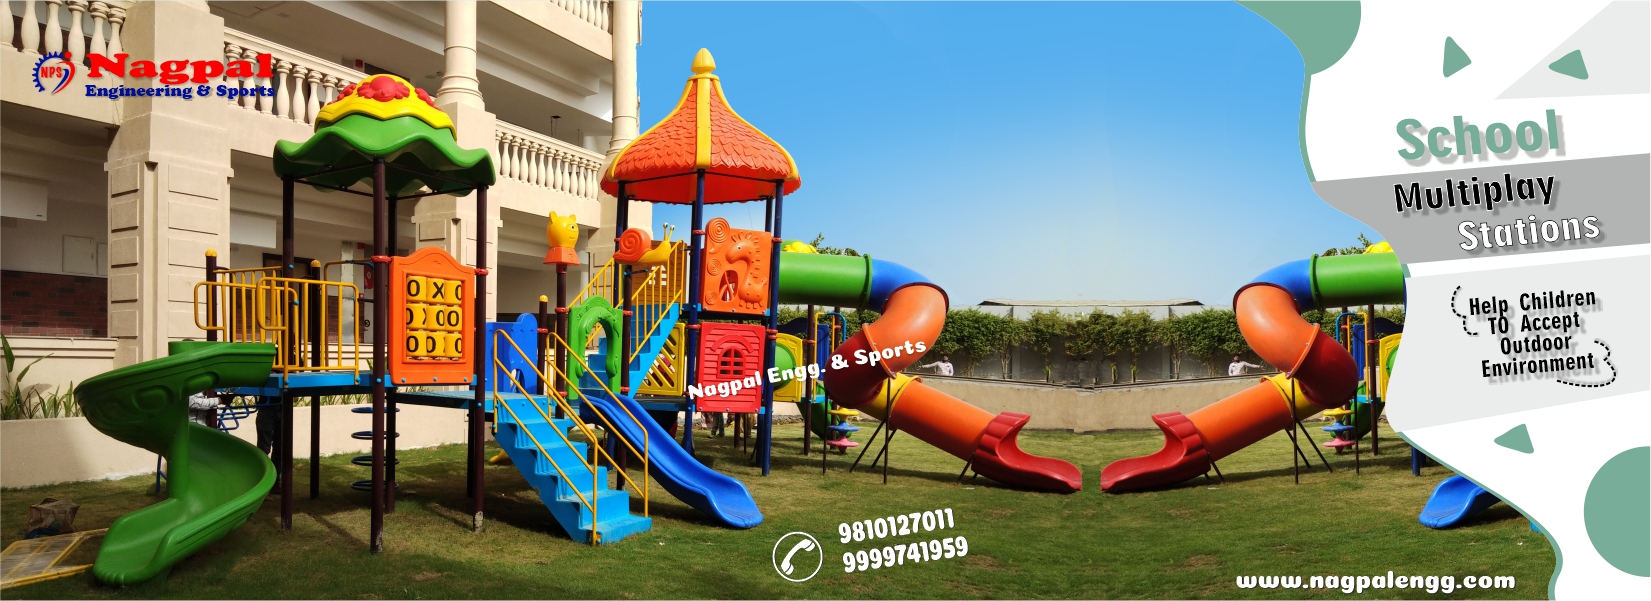 Roto Multiplay System Manufacturers, Exporters & Suppliers in Faizabad